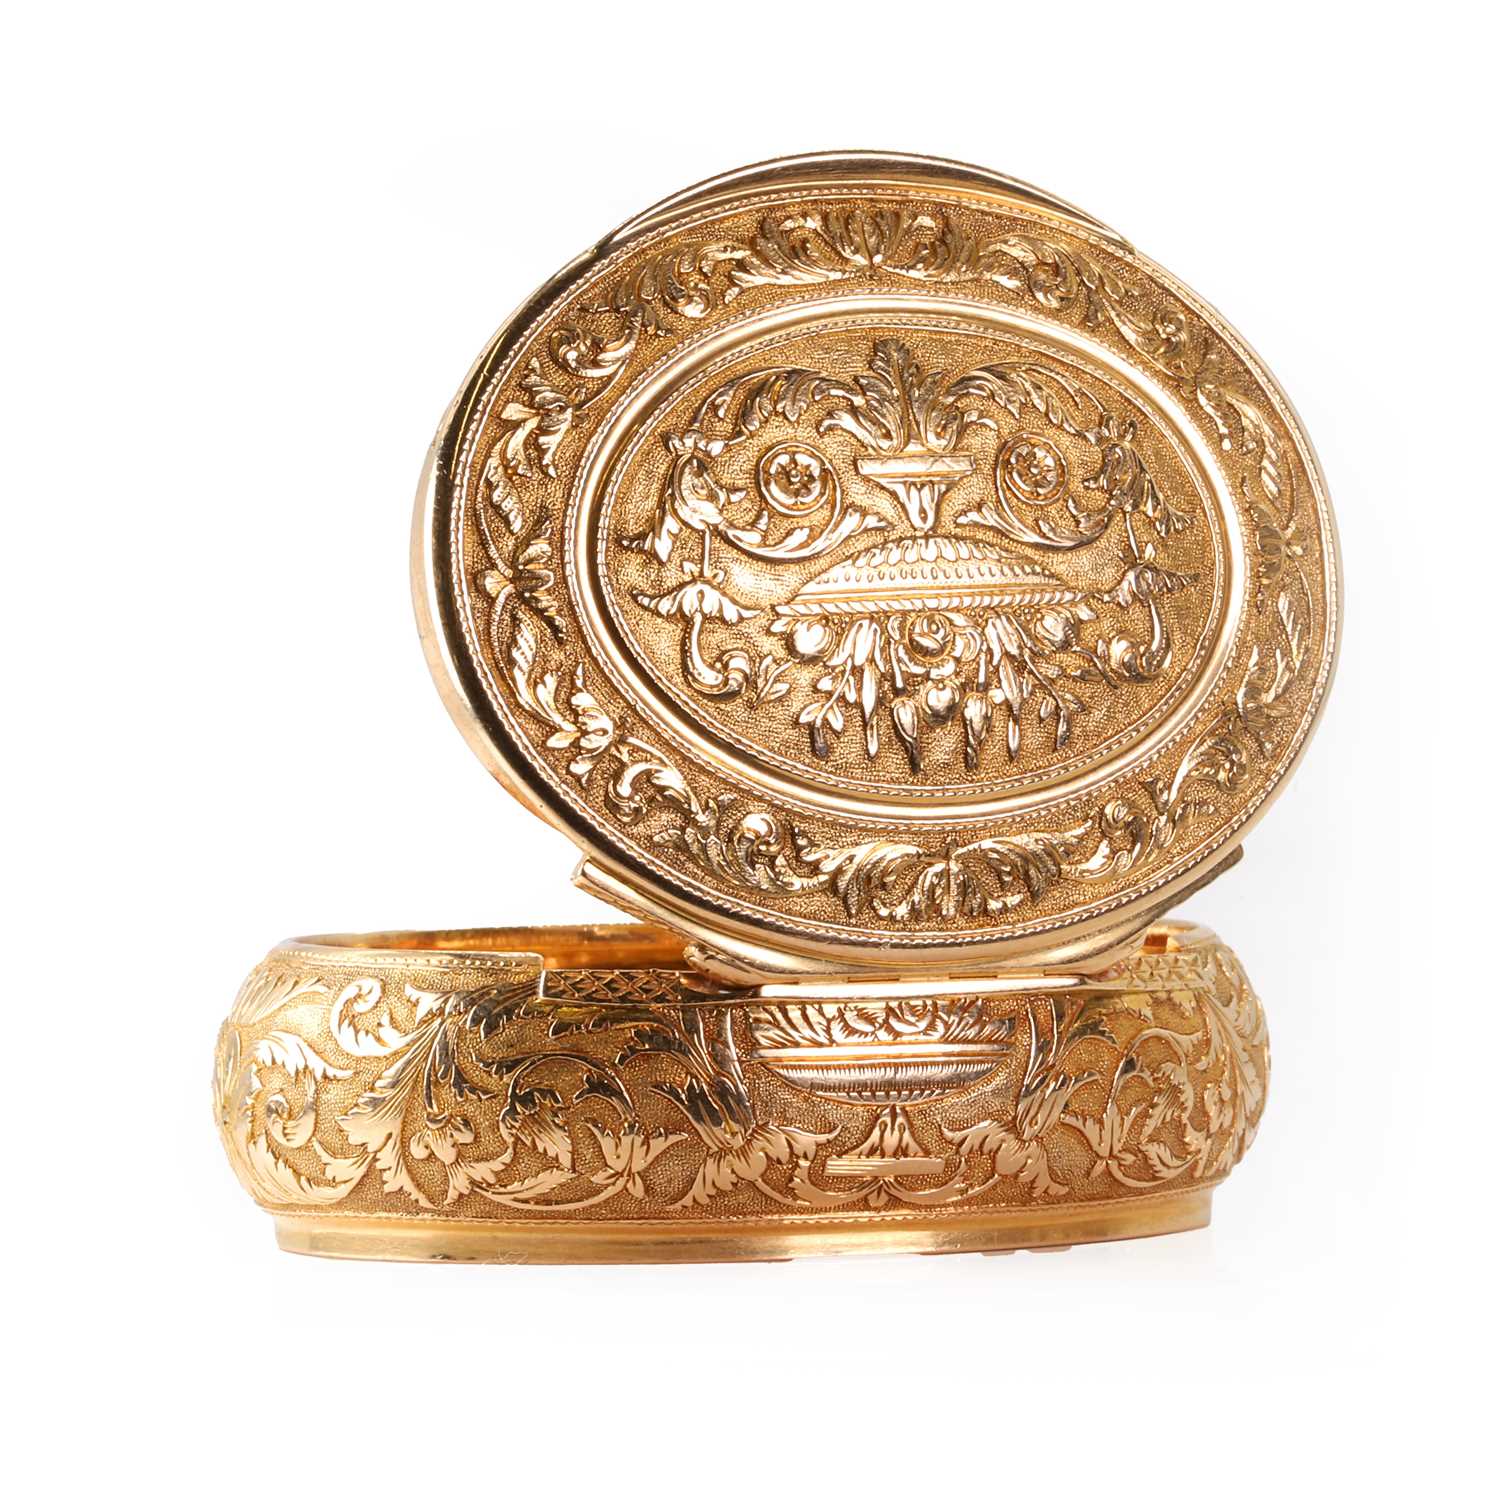 A French gold oval snuffbox, - Image 6 of 7